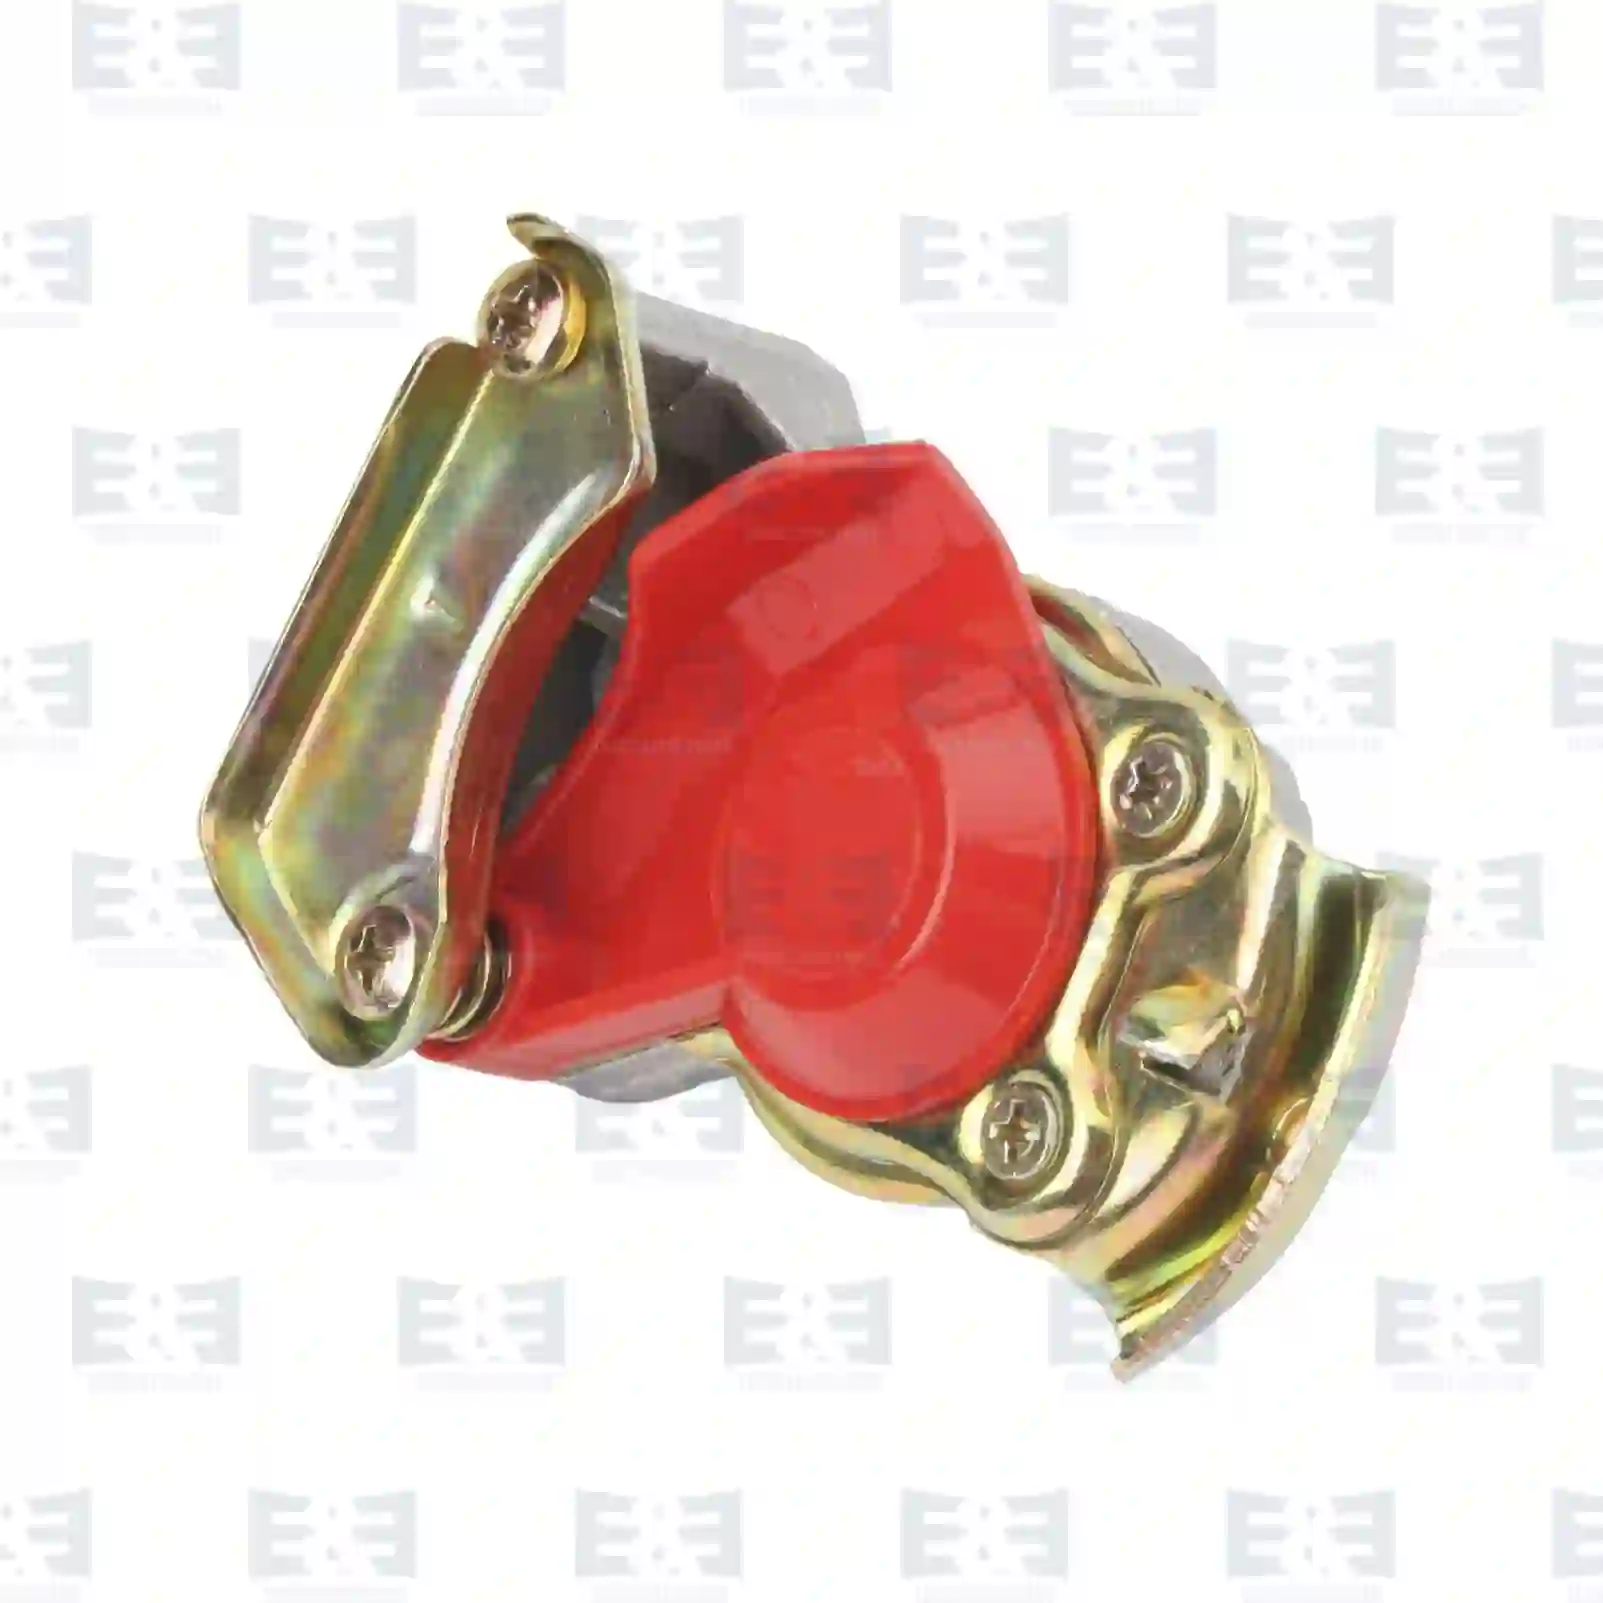  Palm coupling, red lid || E&E Truck Spare Parts | Truck Spare Parts, Auotomotive Spare Parts